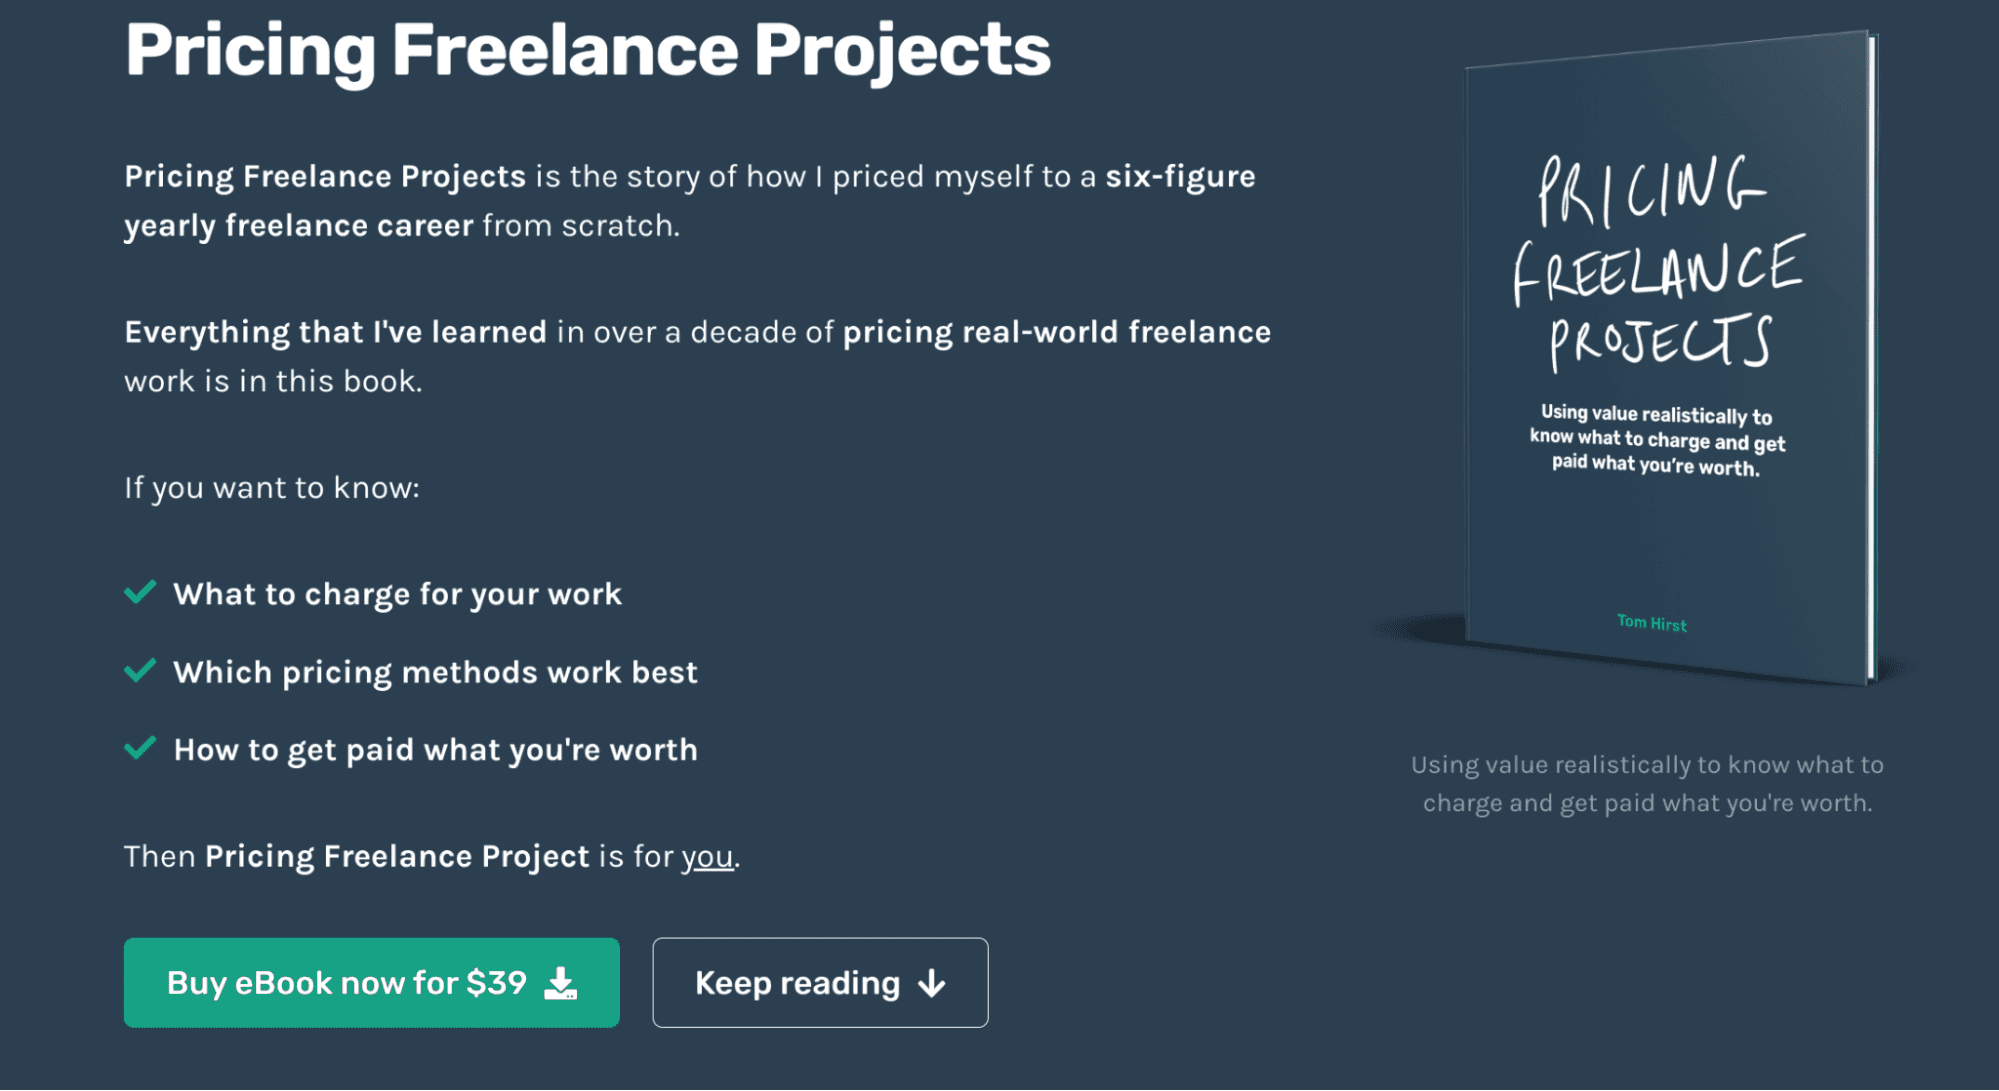  ebook on pricing freelance projects